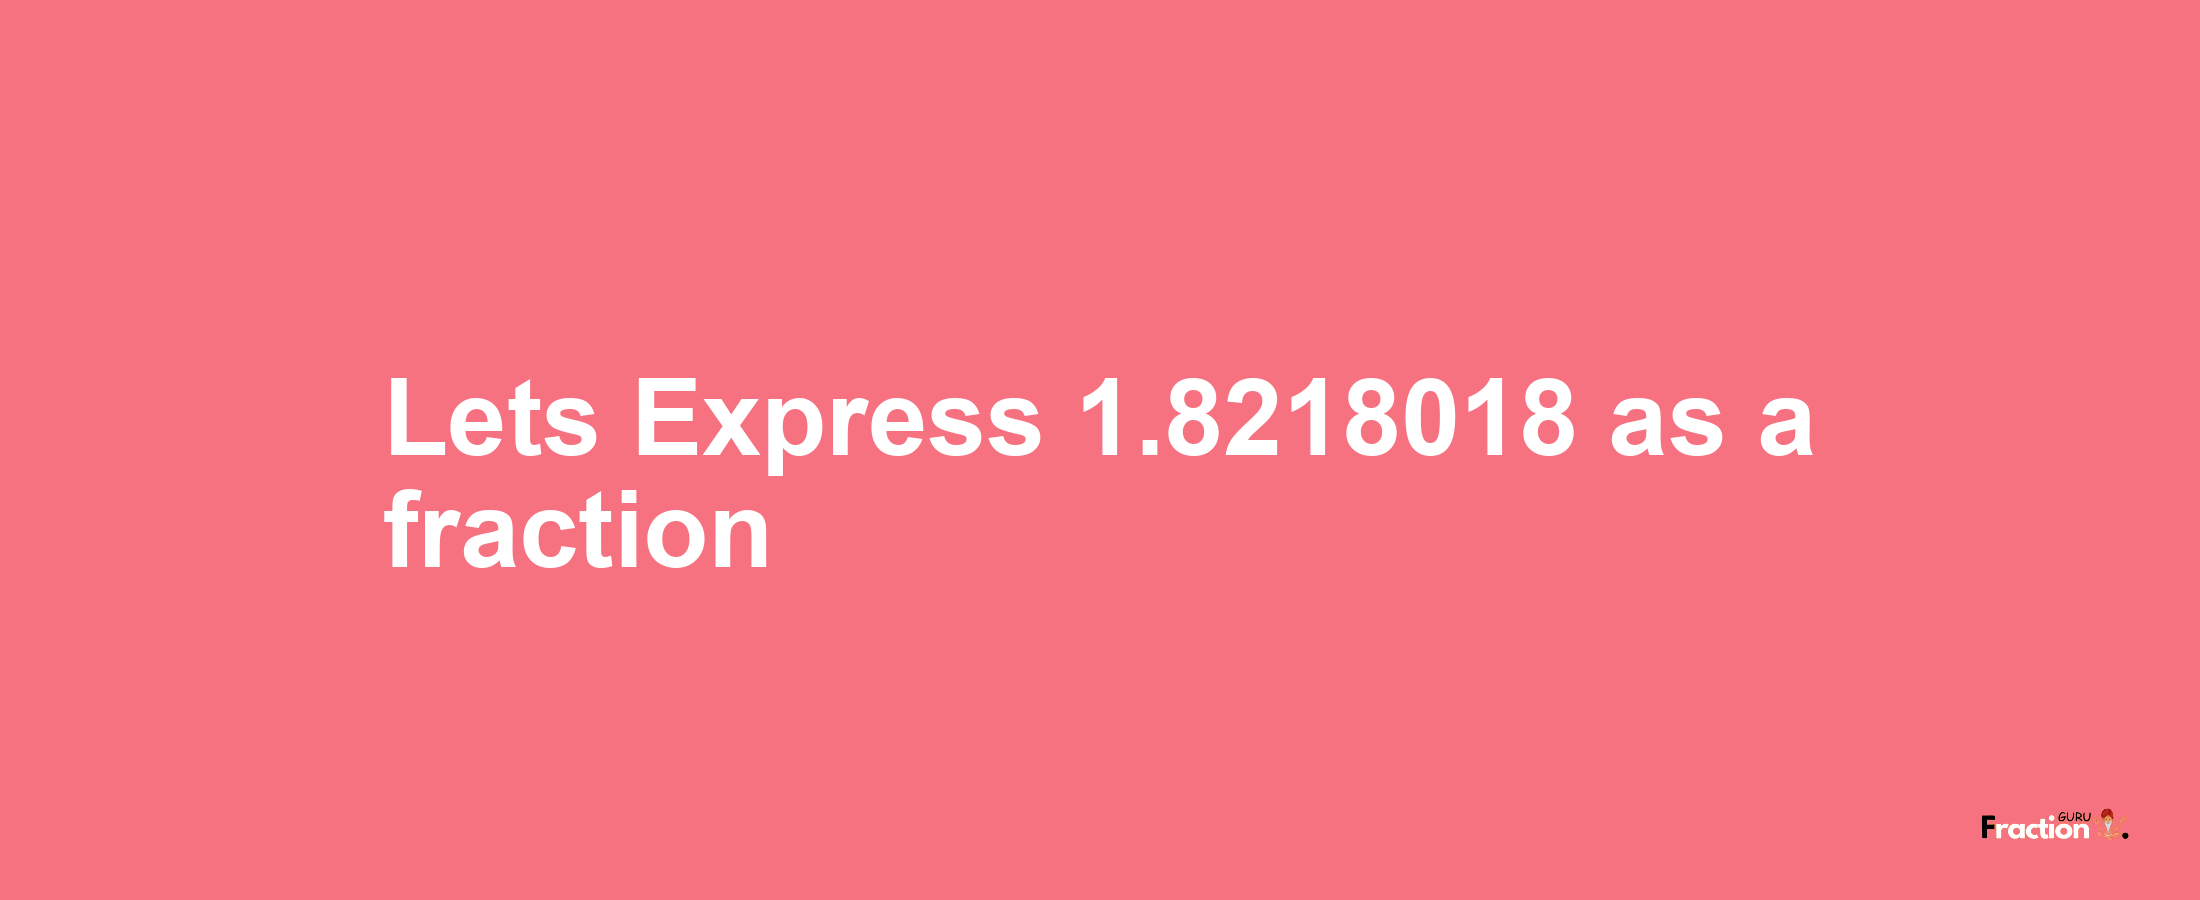 Lets Express 1.8218018 as afraction